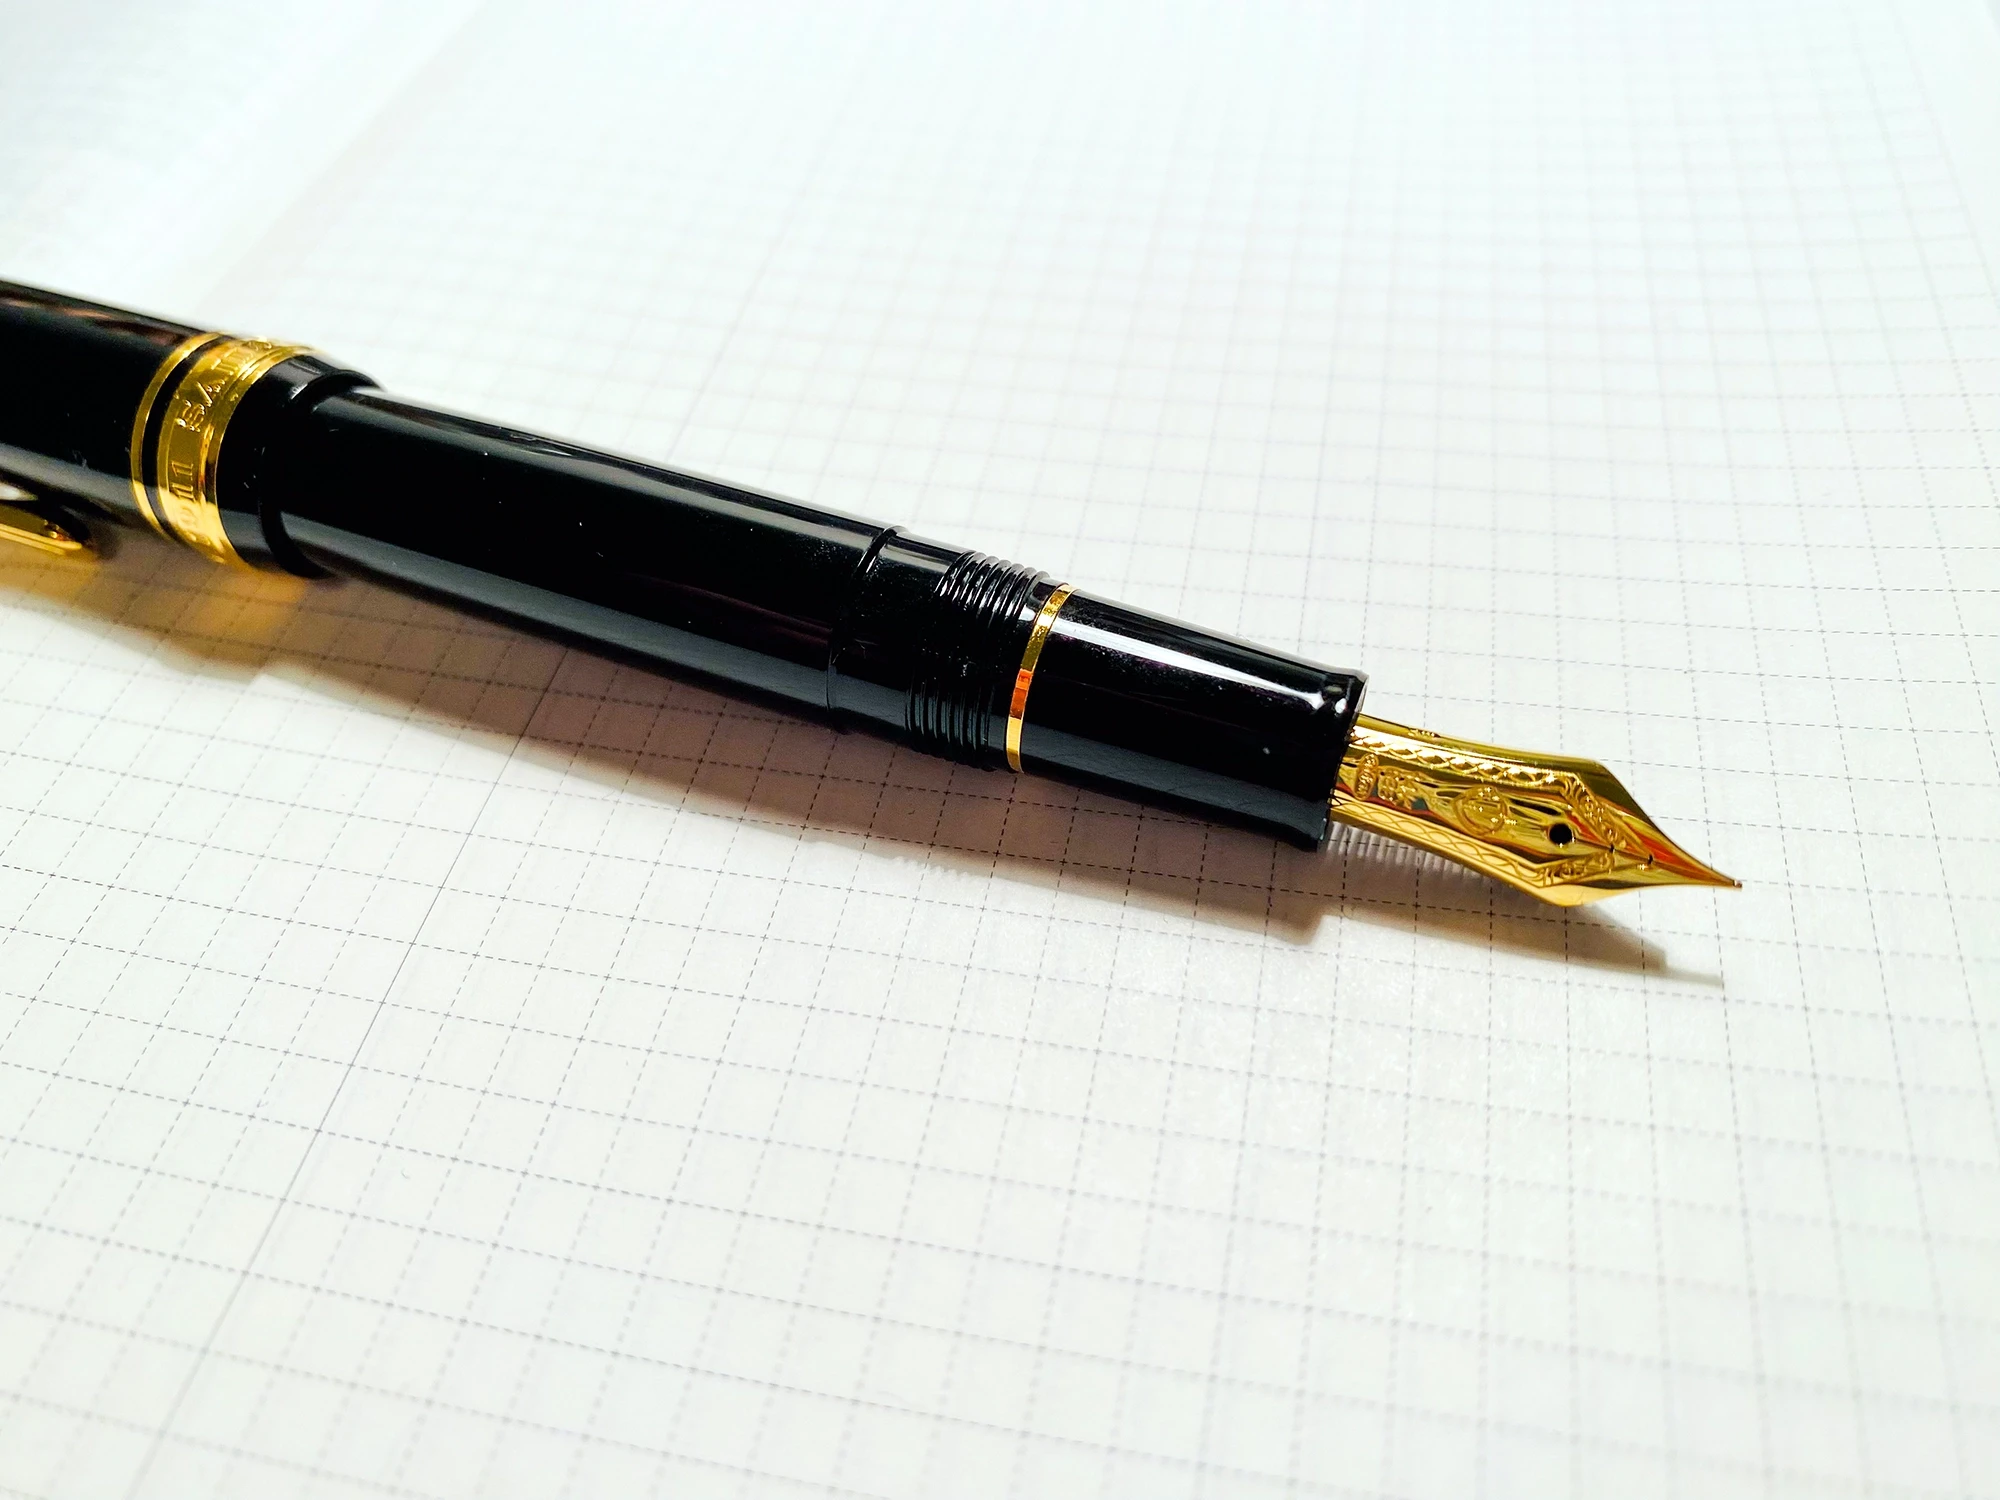 A slim black fountain pen with a shiny gold nib, resting on paper with a faint graph pattern